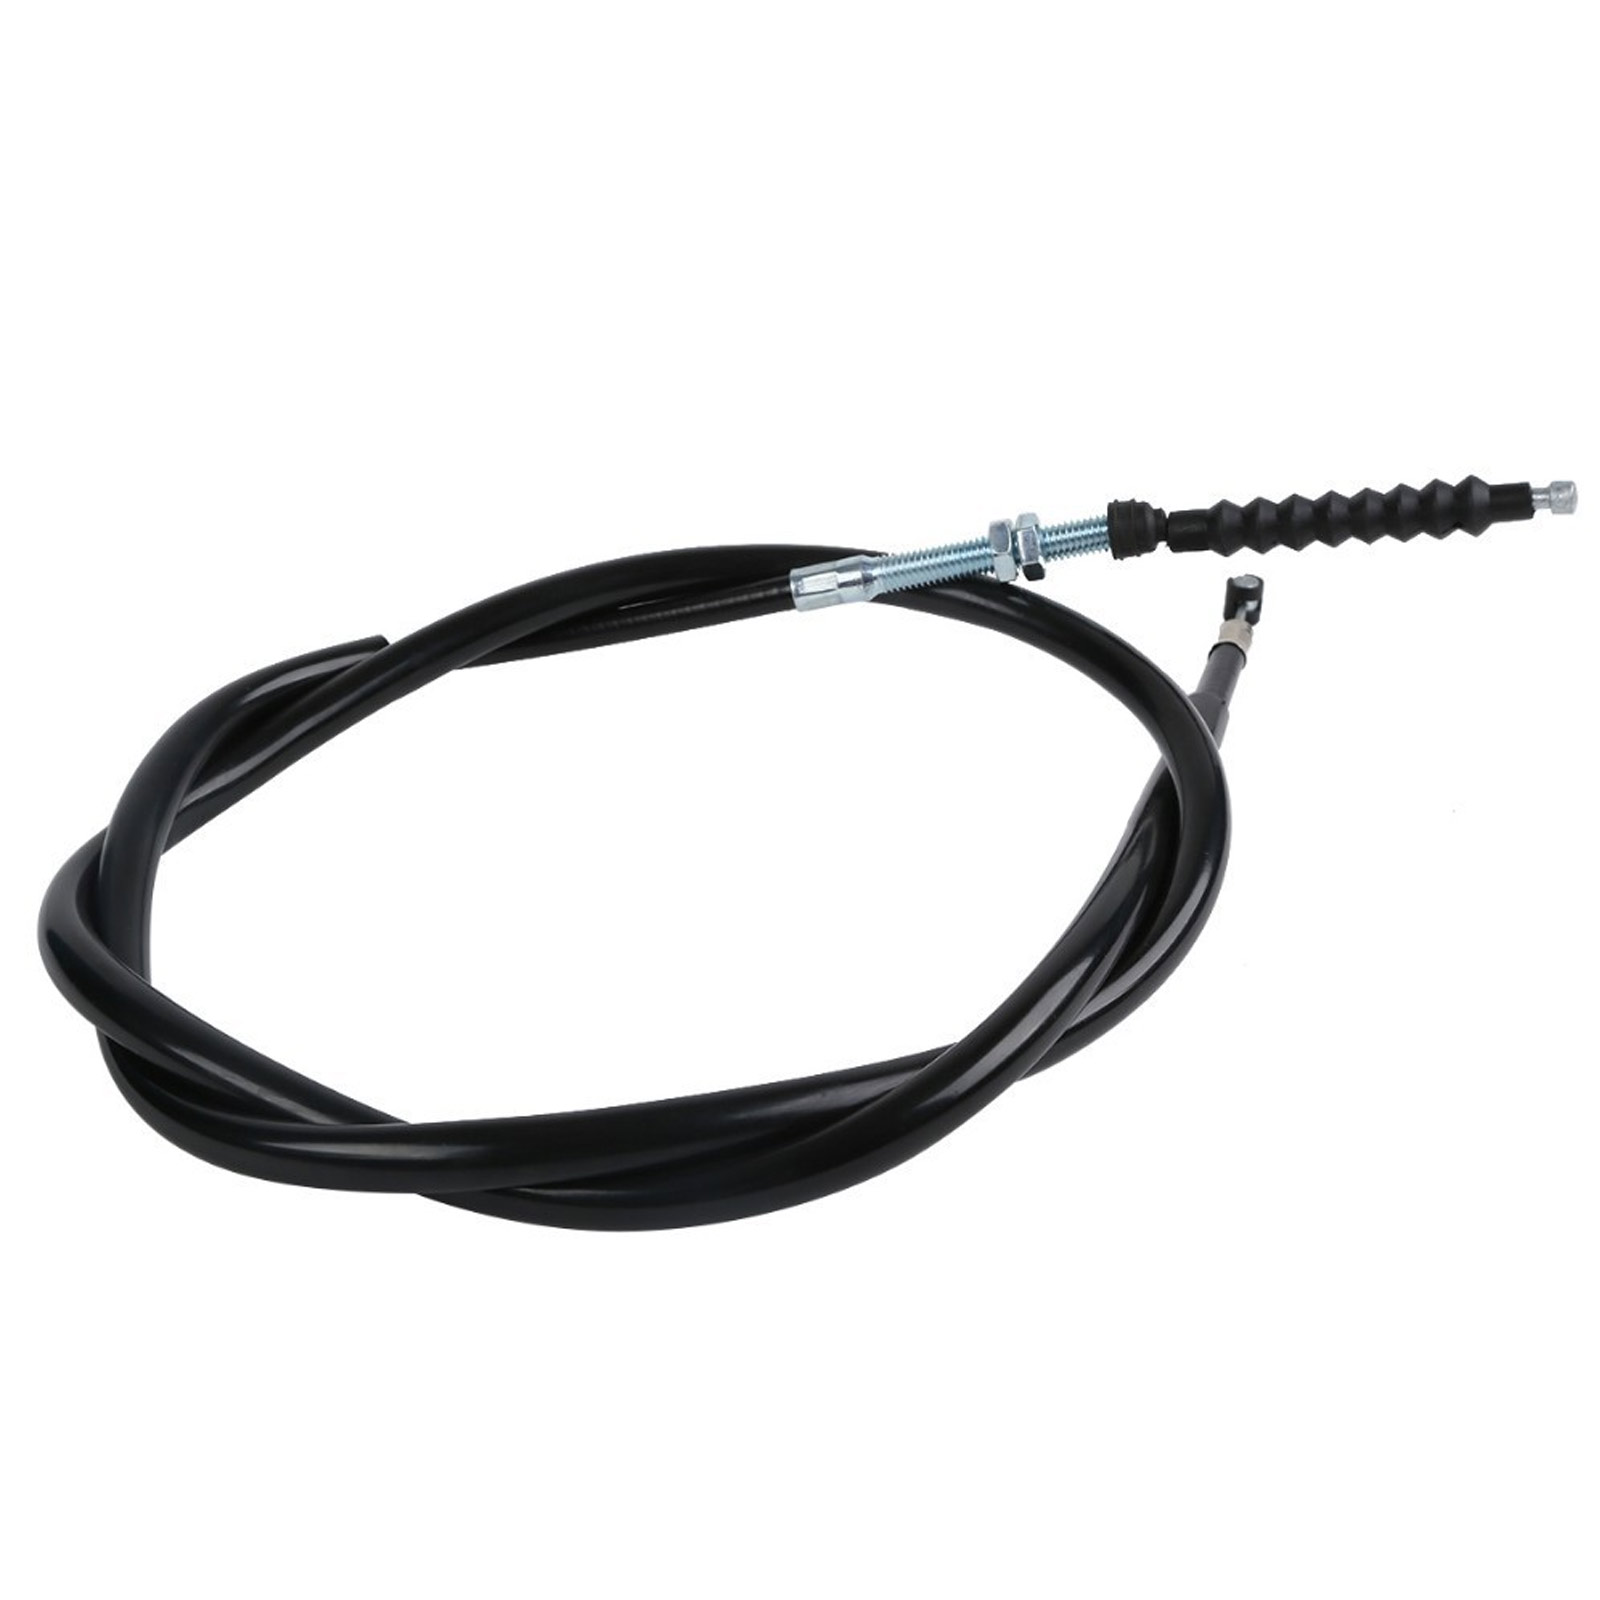 MPW Pattern Replacement Clutch Cable for Yamaha YZF R1 04-08 